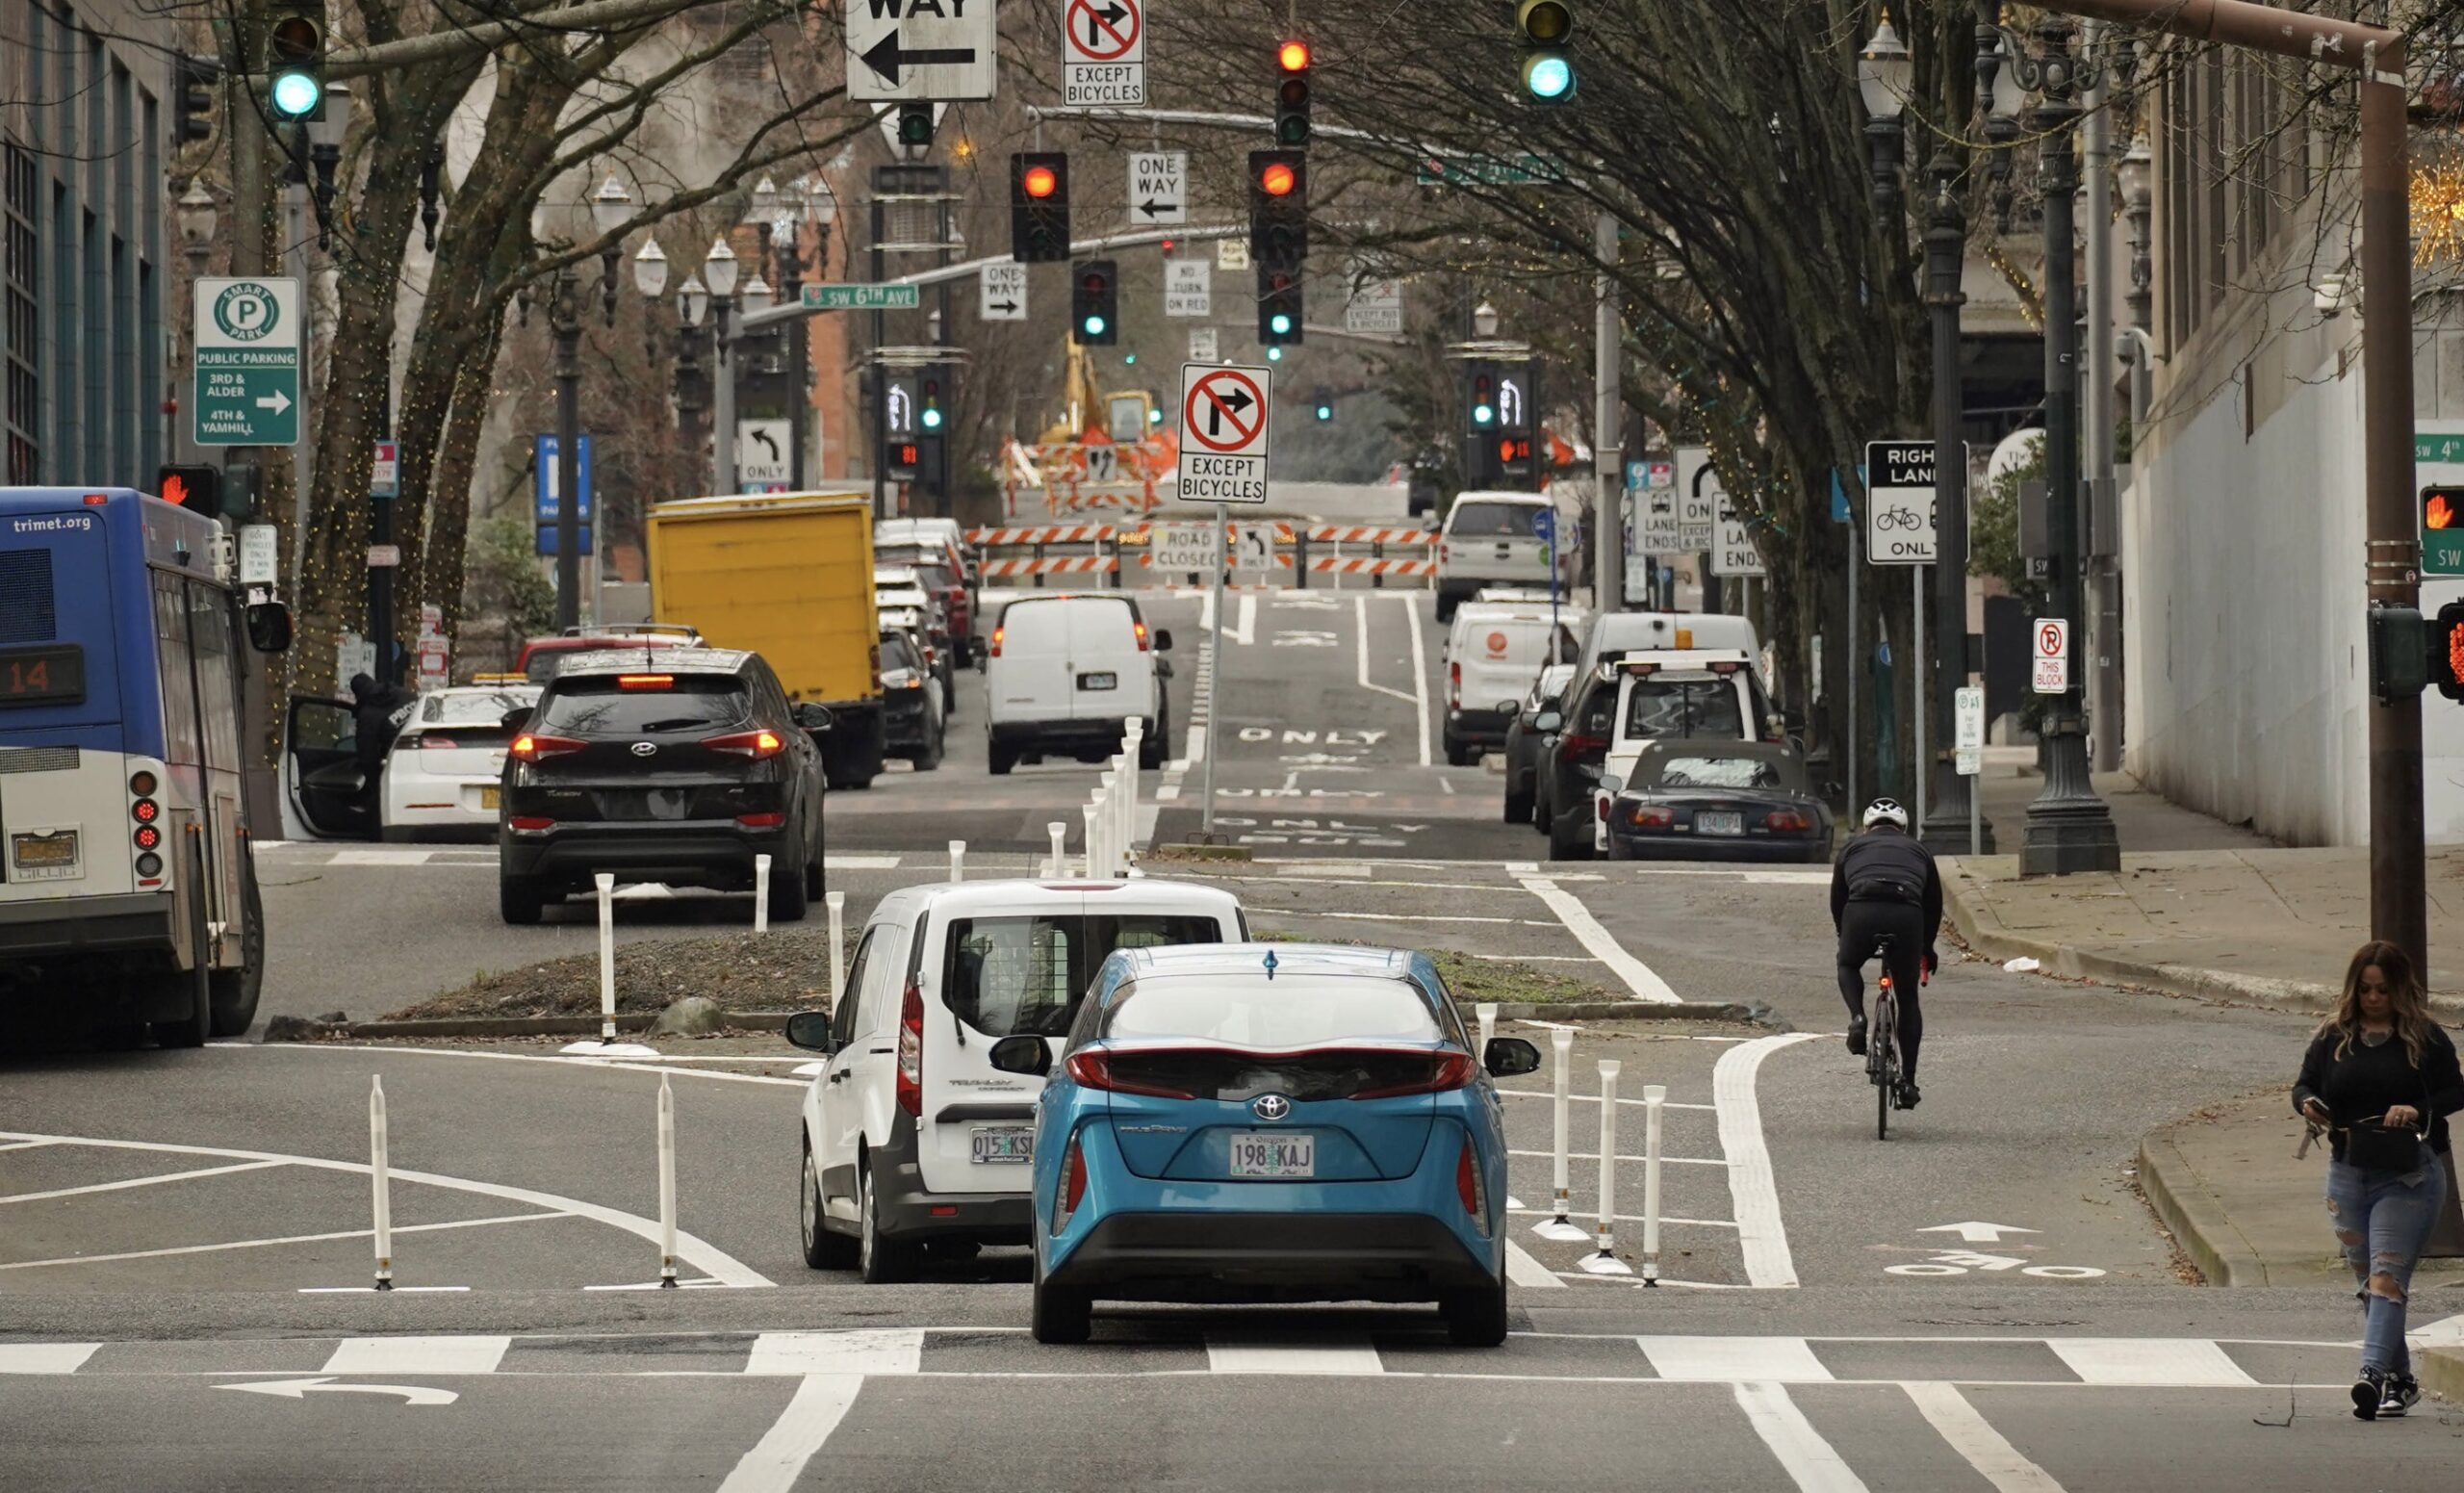 City counts reveal data behind Portland's precipitous drop in cycling –  BikePortland